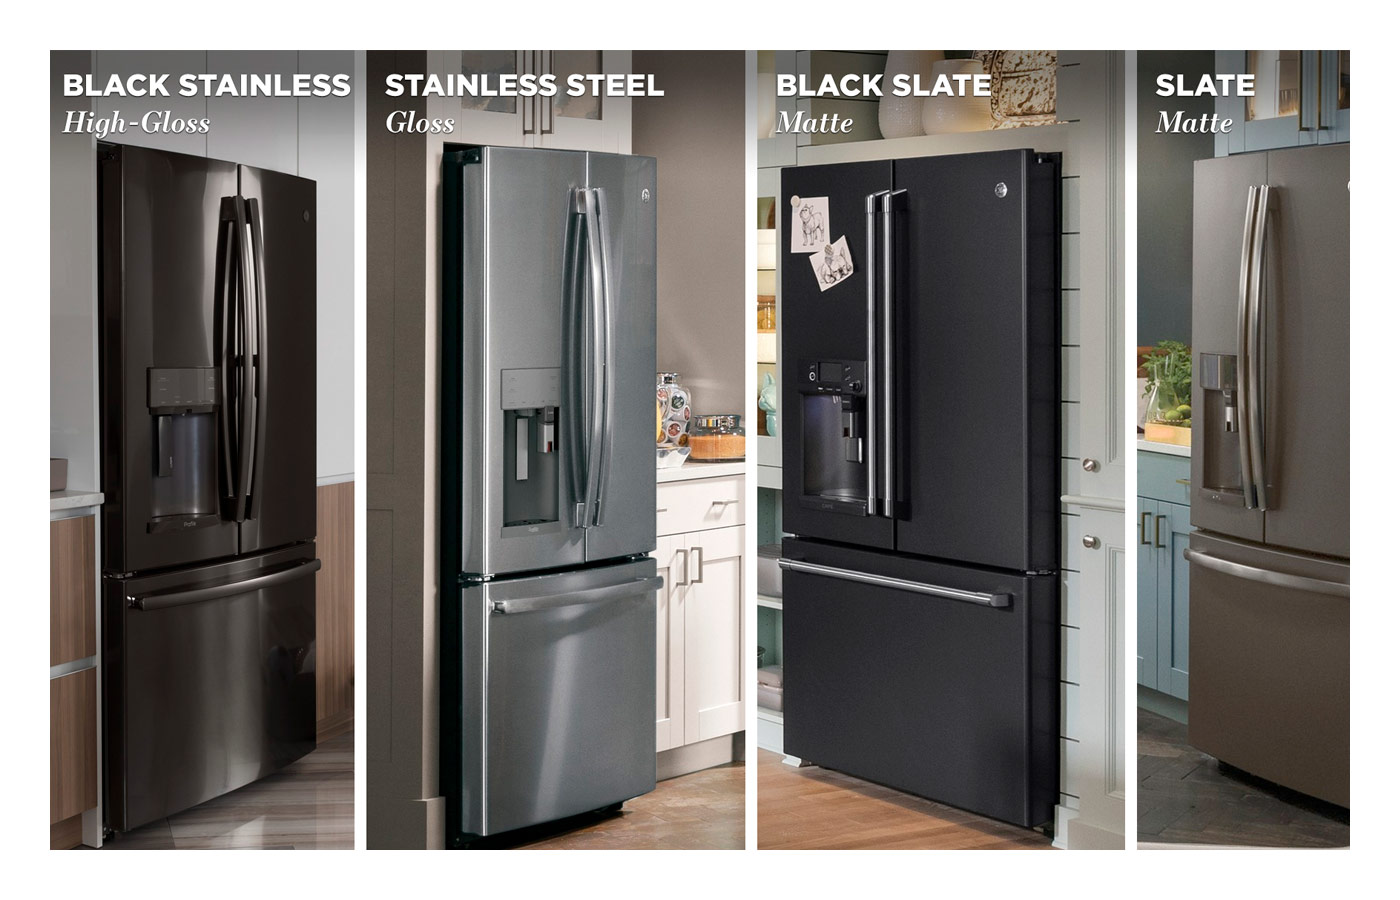 Premium Appliance Finishes in Stainless Steel, Black Stainless, Slate, and Black Slate